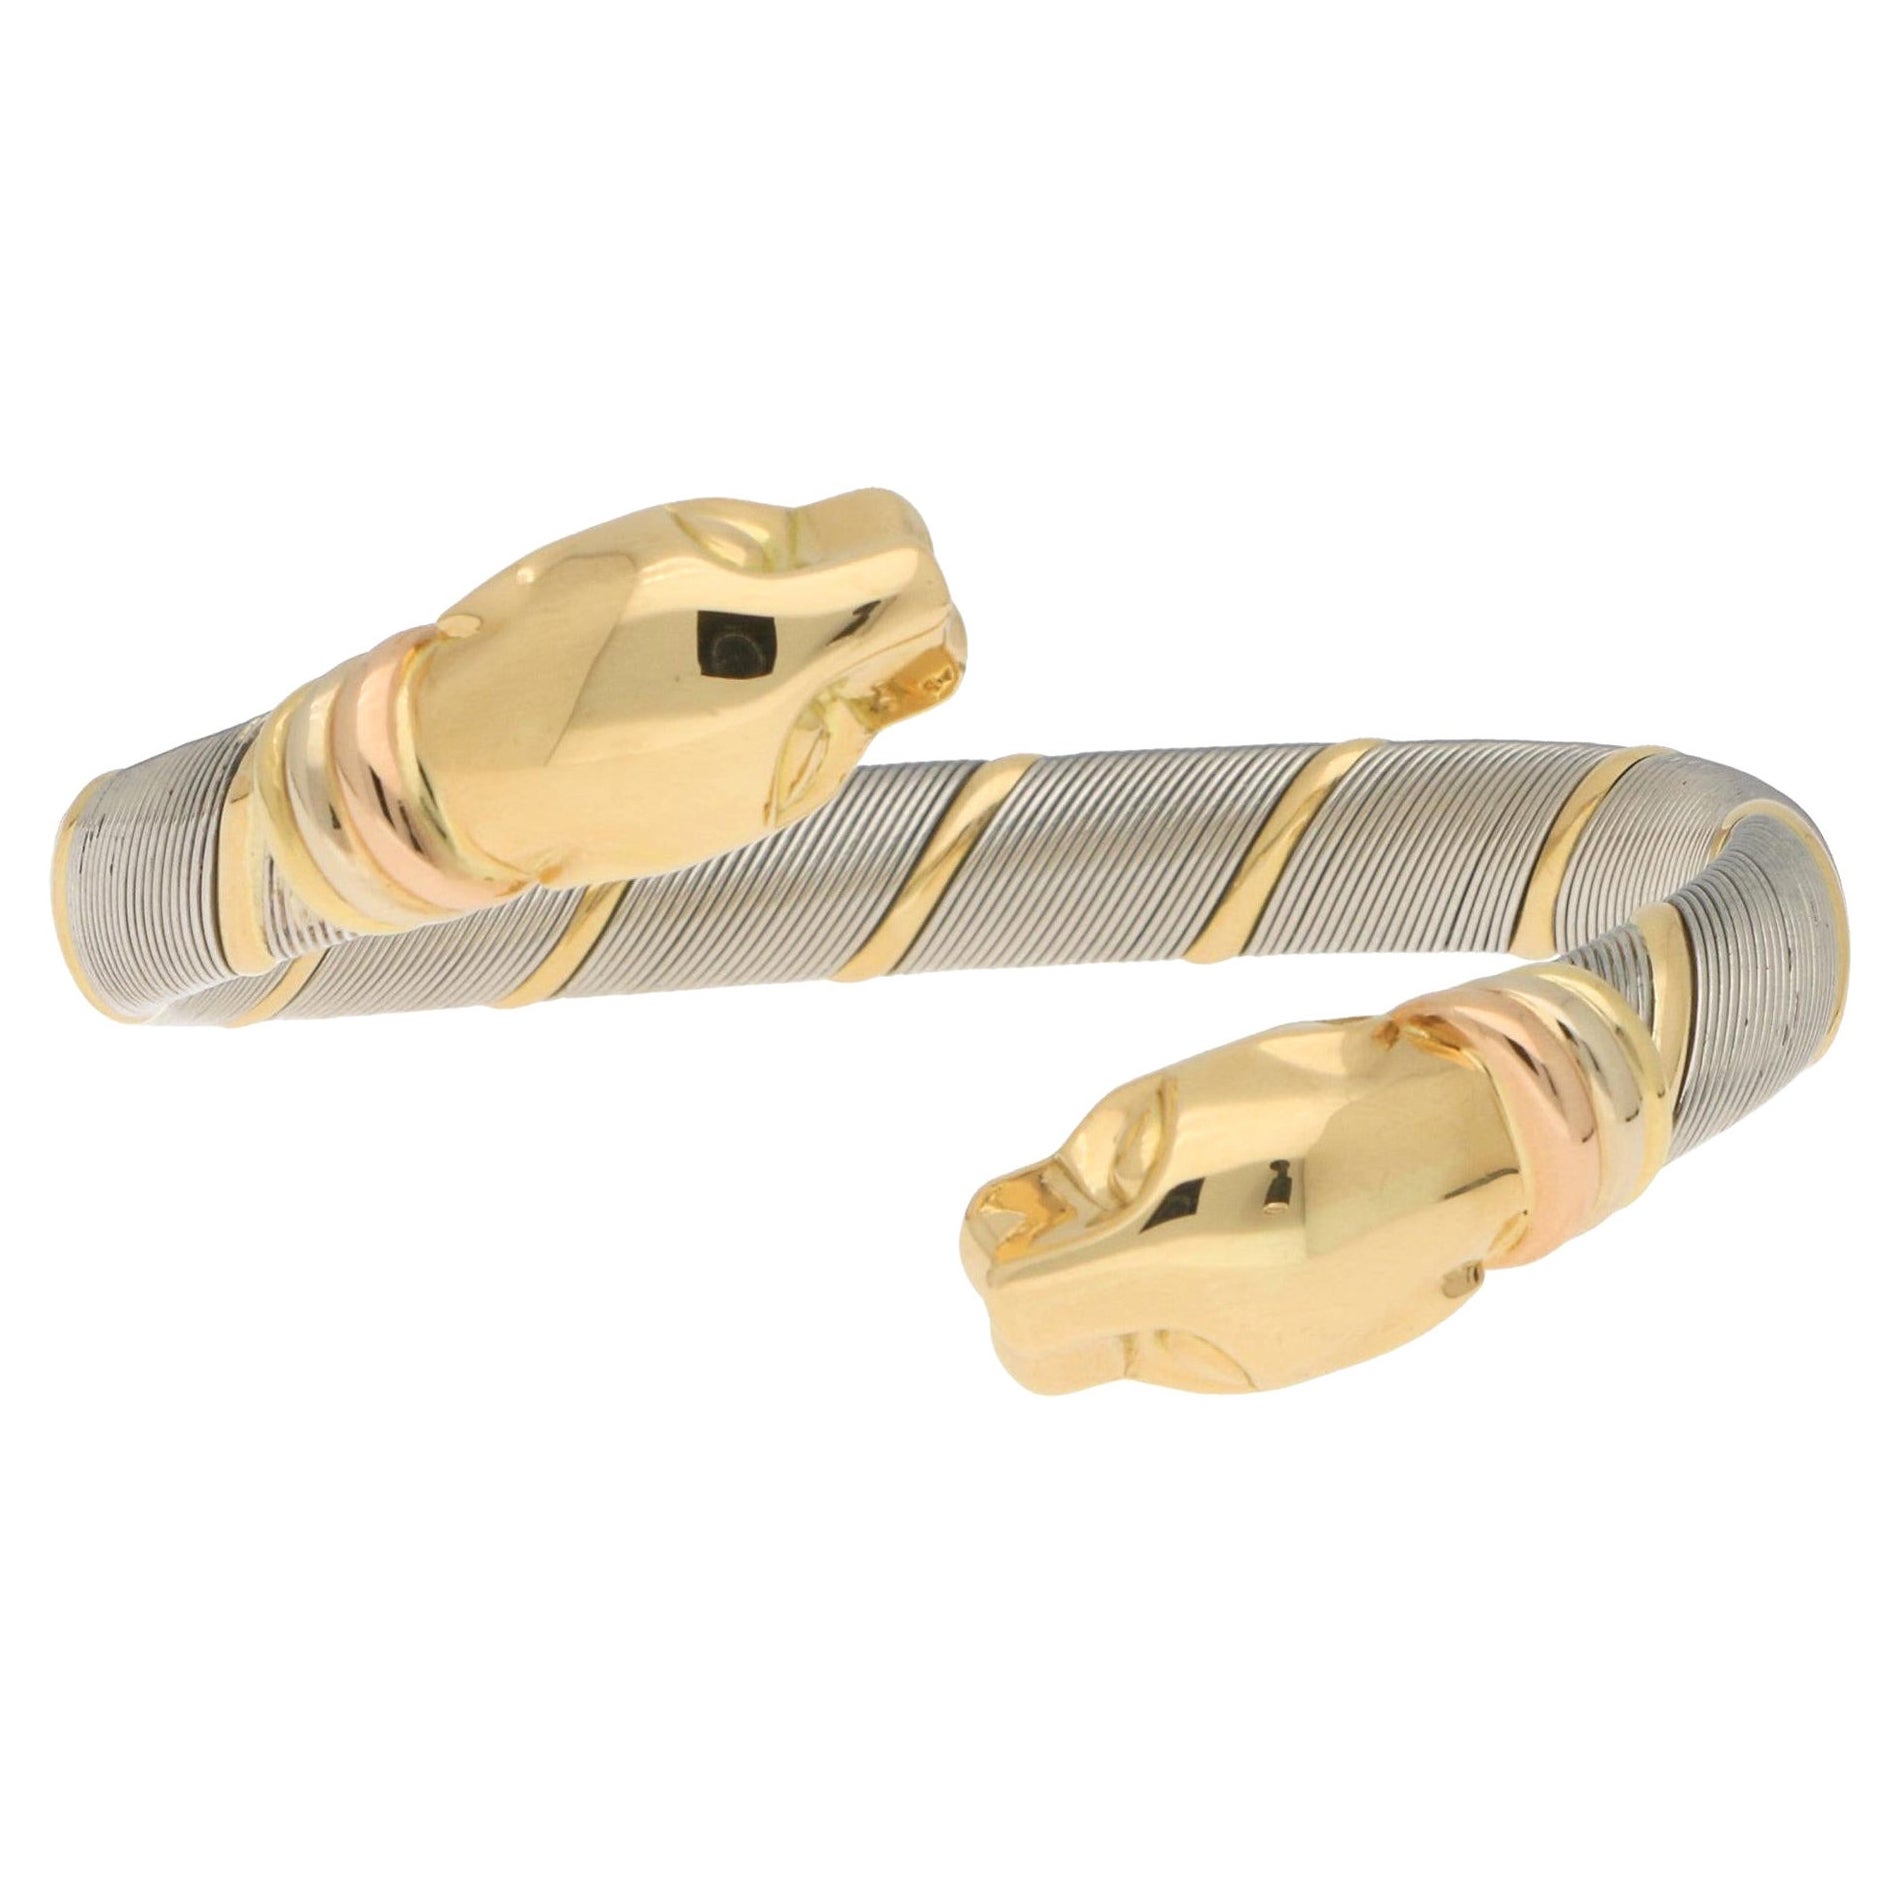 Vintage Cartier Double Headed Panthère Bangle in Stainless Steel and 18k Gold